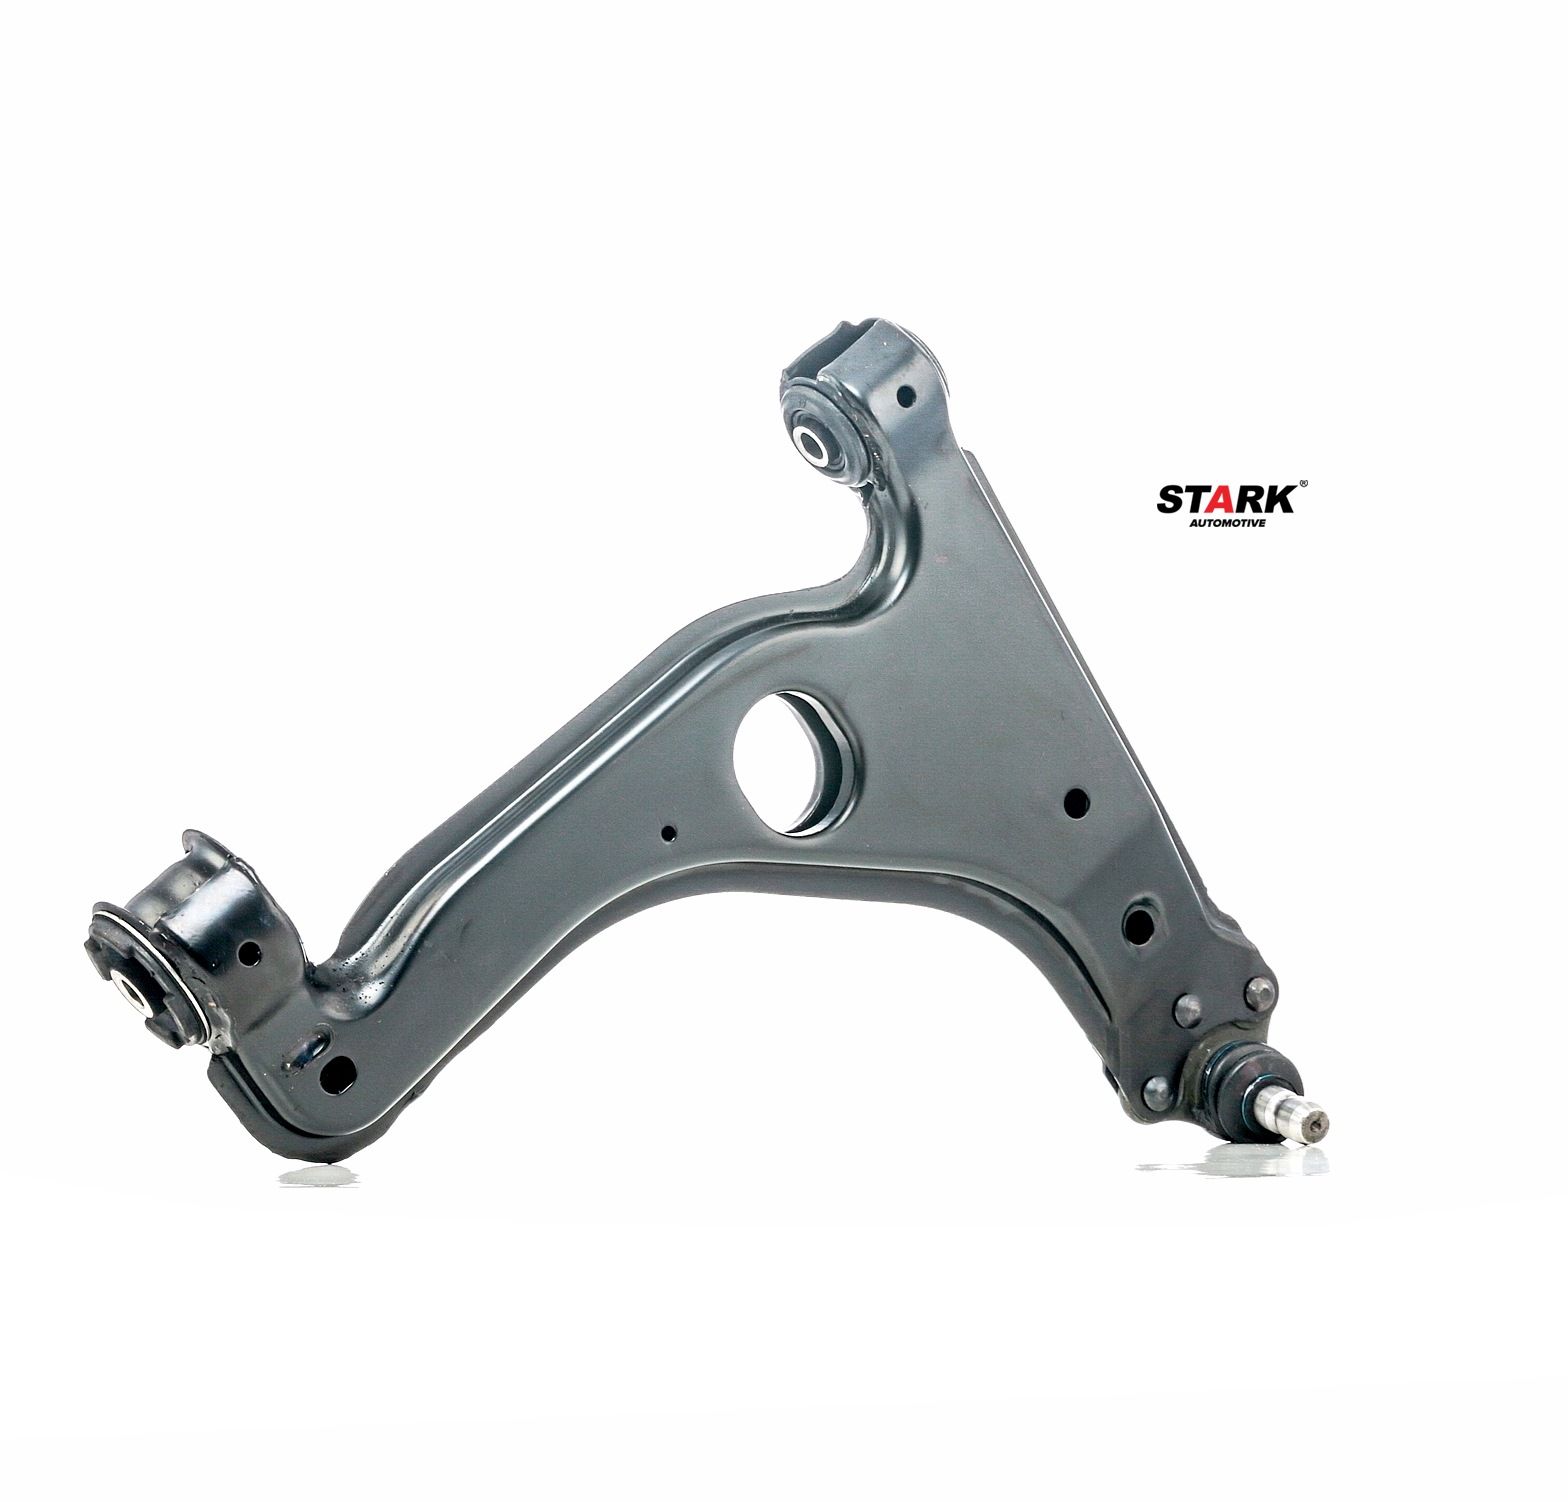 STARK SKCA-0050134 Suspension arm with bearing(s), Front Axle Right, Lower, Control Arm, Sheet Steel, Cone Size: 18 mm